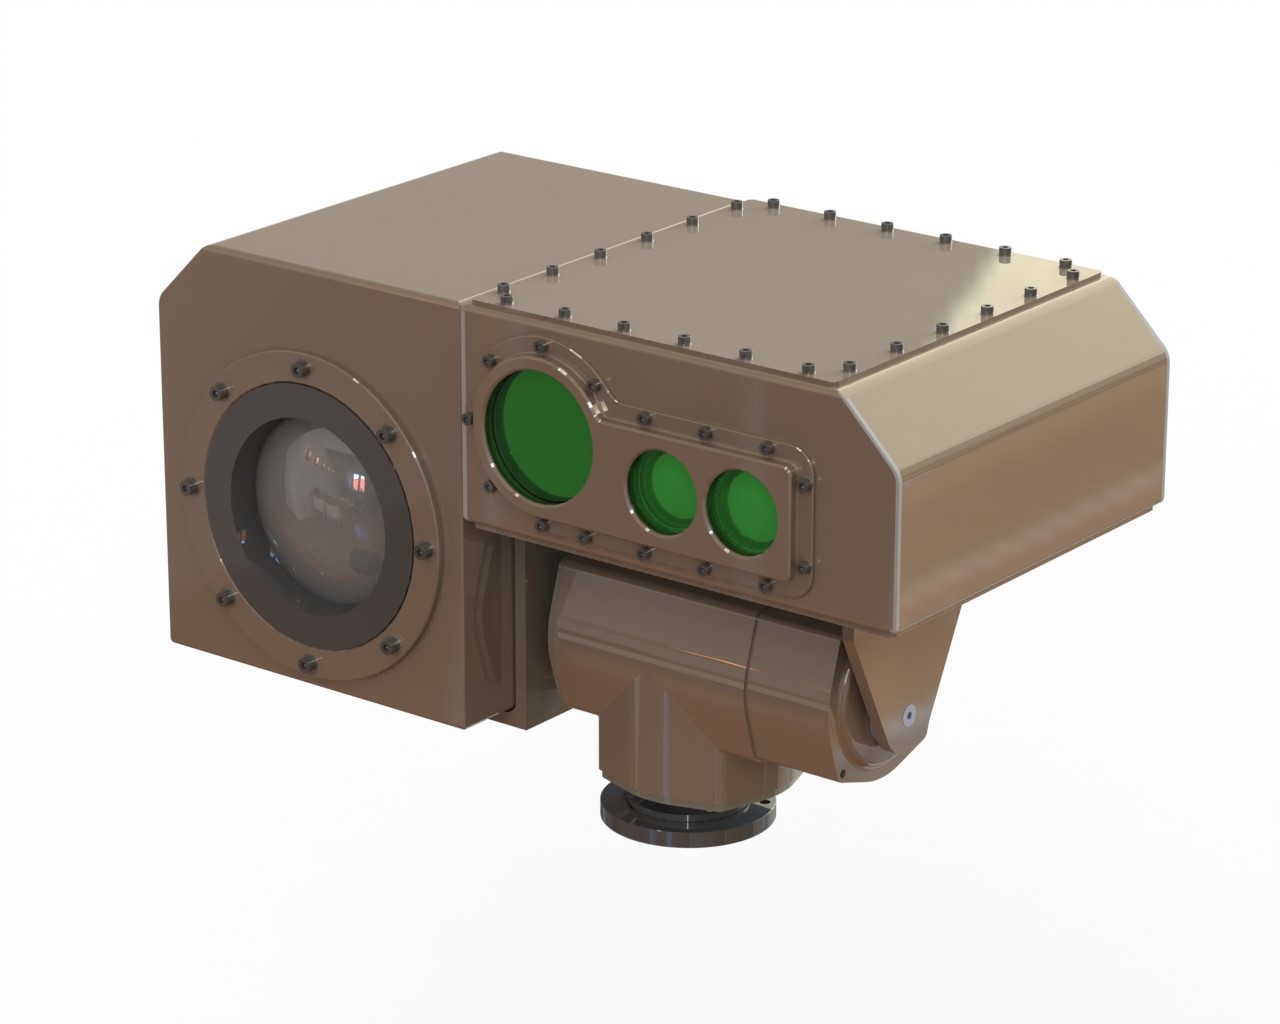 Firefly Thermal Cameras for The Military